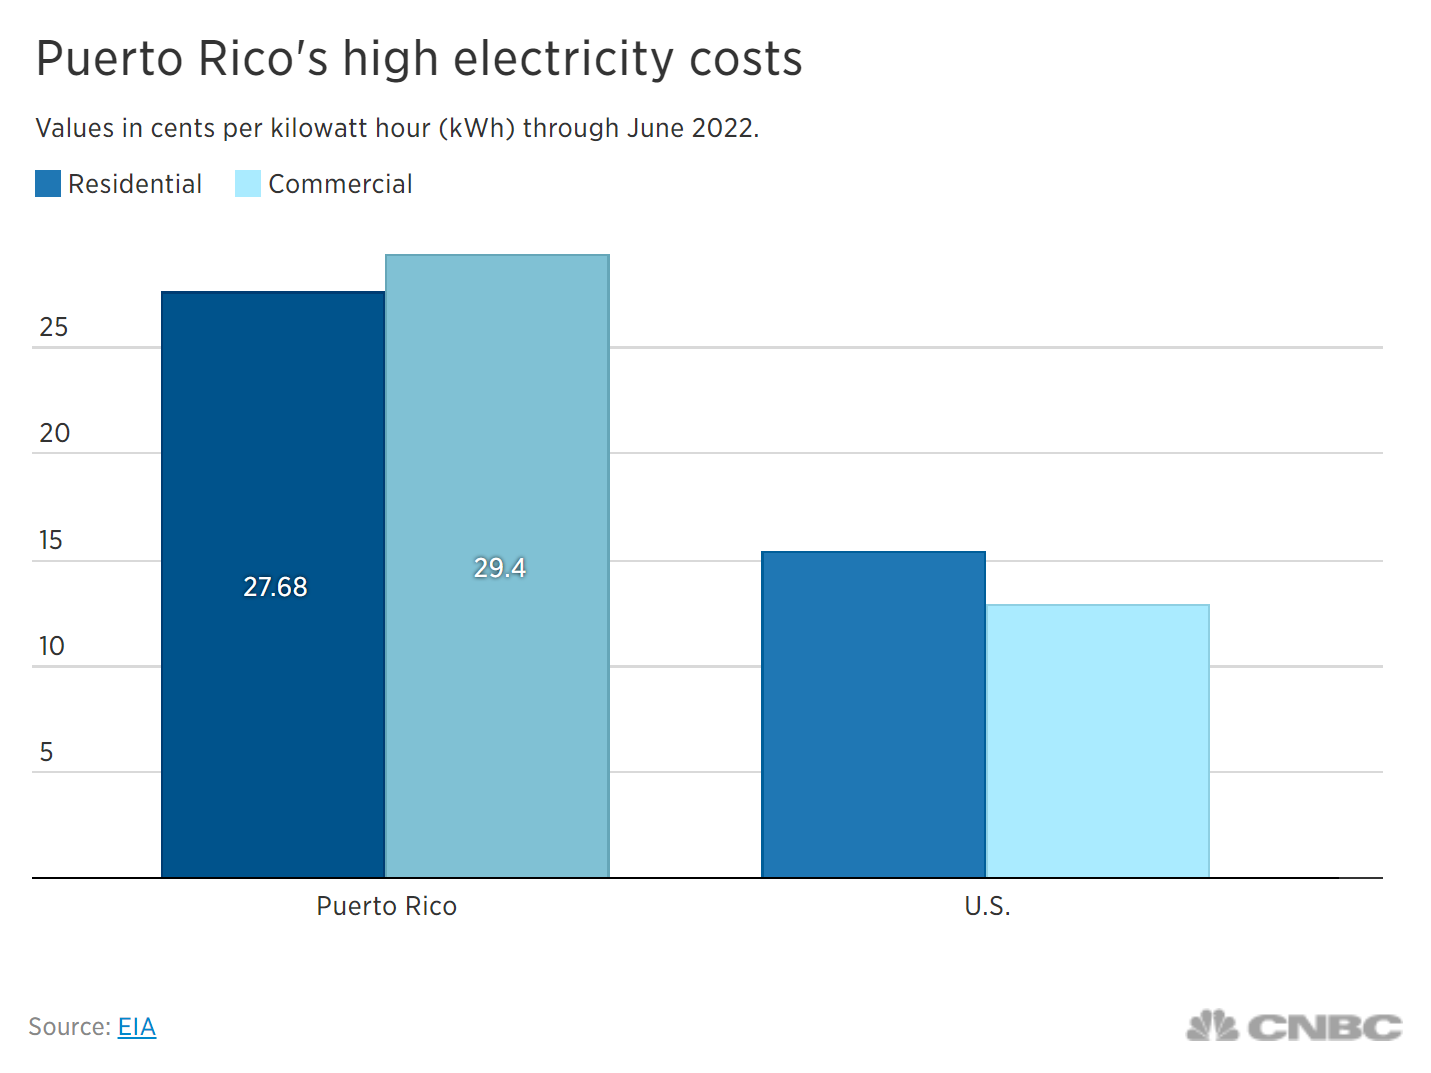 Cost of electricity in Puerto Rico (left) and the mainland U.S. (right) through June 2022. Data from the U.S. Energy Information Administration show that commercial customers in Puerto Rico on average pay 29.4 cents per kilowatt hour as of June 2022. That’s more than double the U.S. average of 12.9 cents per kWh. Residential customers, meanwhile, pay 27.68 cents per kWh on average, while the U.S. average is around 15 cents per kWh. Data: EIA. Graphic: CNBC